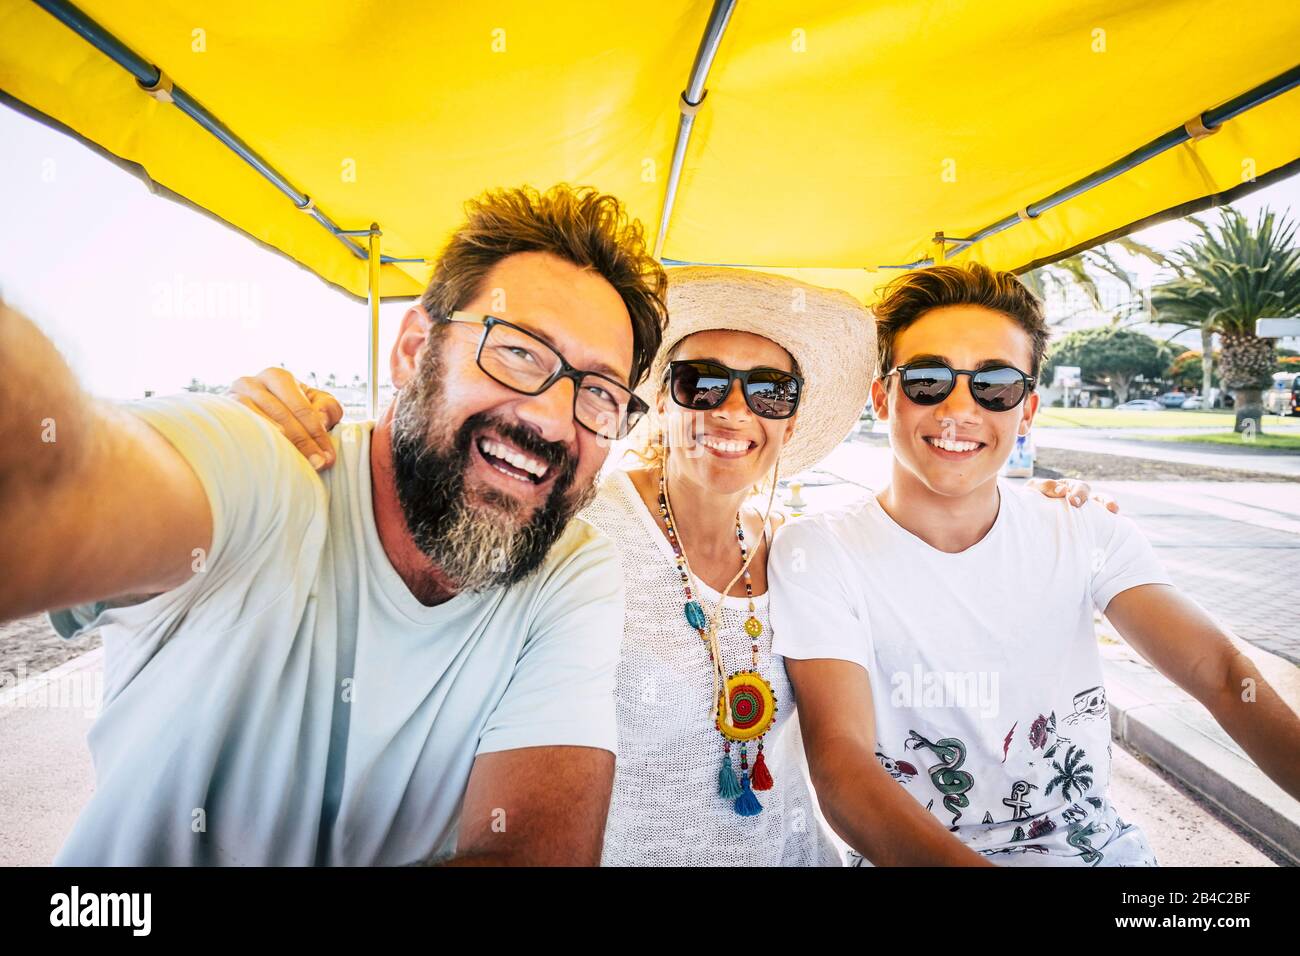 Family happy people concept - mother son and father laugh a lot and have fun together in outdoor leisure activity - caucasian group of friends different ages and generations Stock Photo